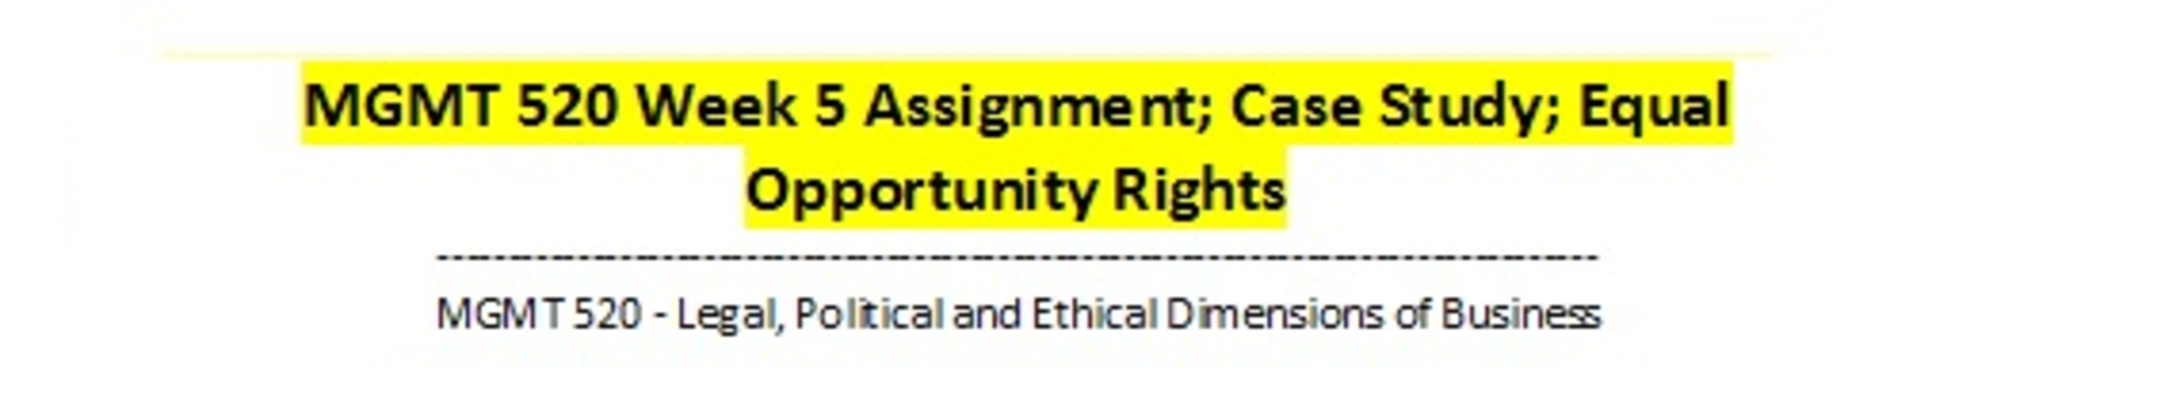 MGMT 520 Week 5 Assignment; Case Study; Equal Opportunity Rights